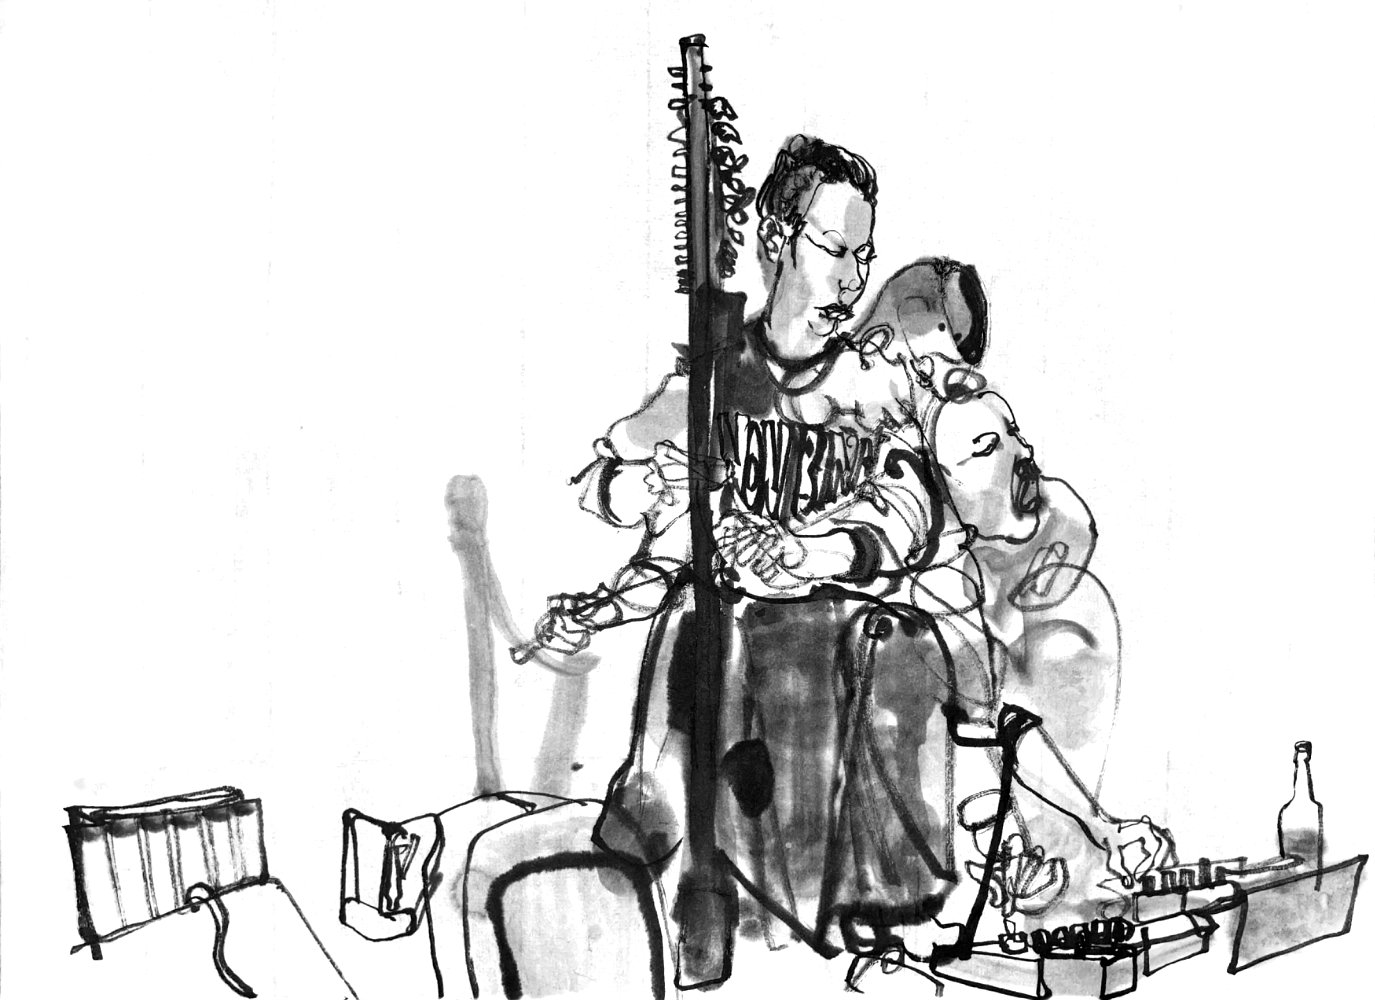 Ink drawing of a harp player, depicted in differnt poses at once, hands playing the harp, playing it with a violin bow and operating electronic devices, that are placed beside the instrument. The head is upright, viewing down to the e-devices, and in a bend-down screaming pose. The musician is wearing a shirt with the lettering 'NON BINARY'.